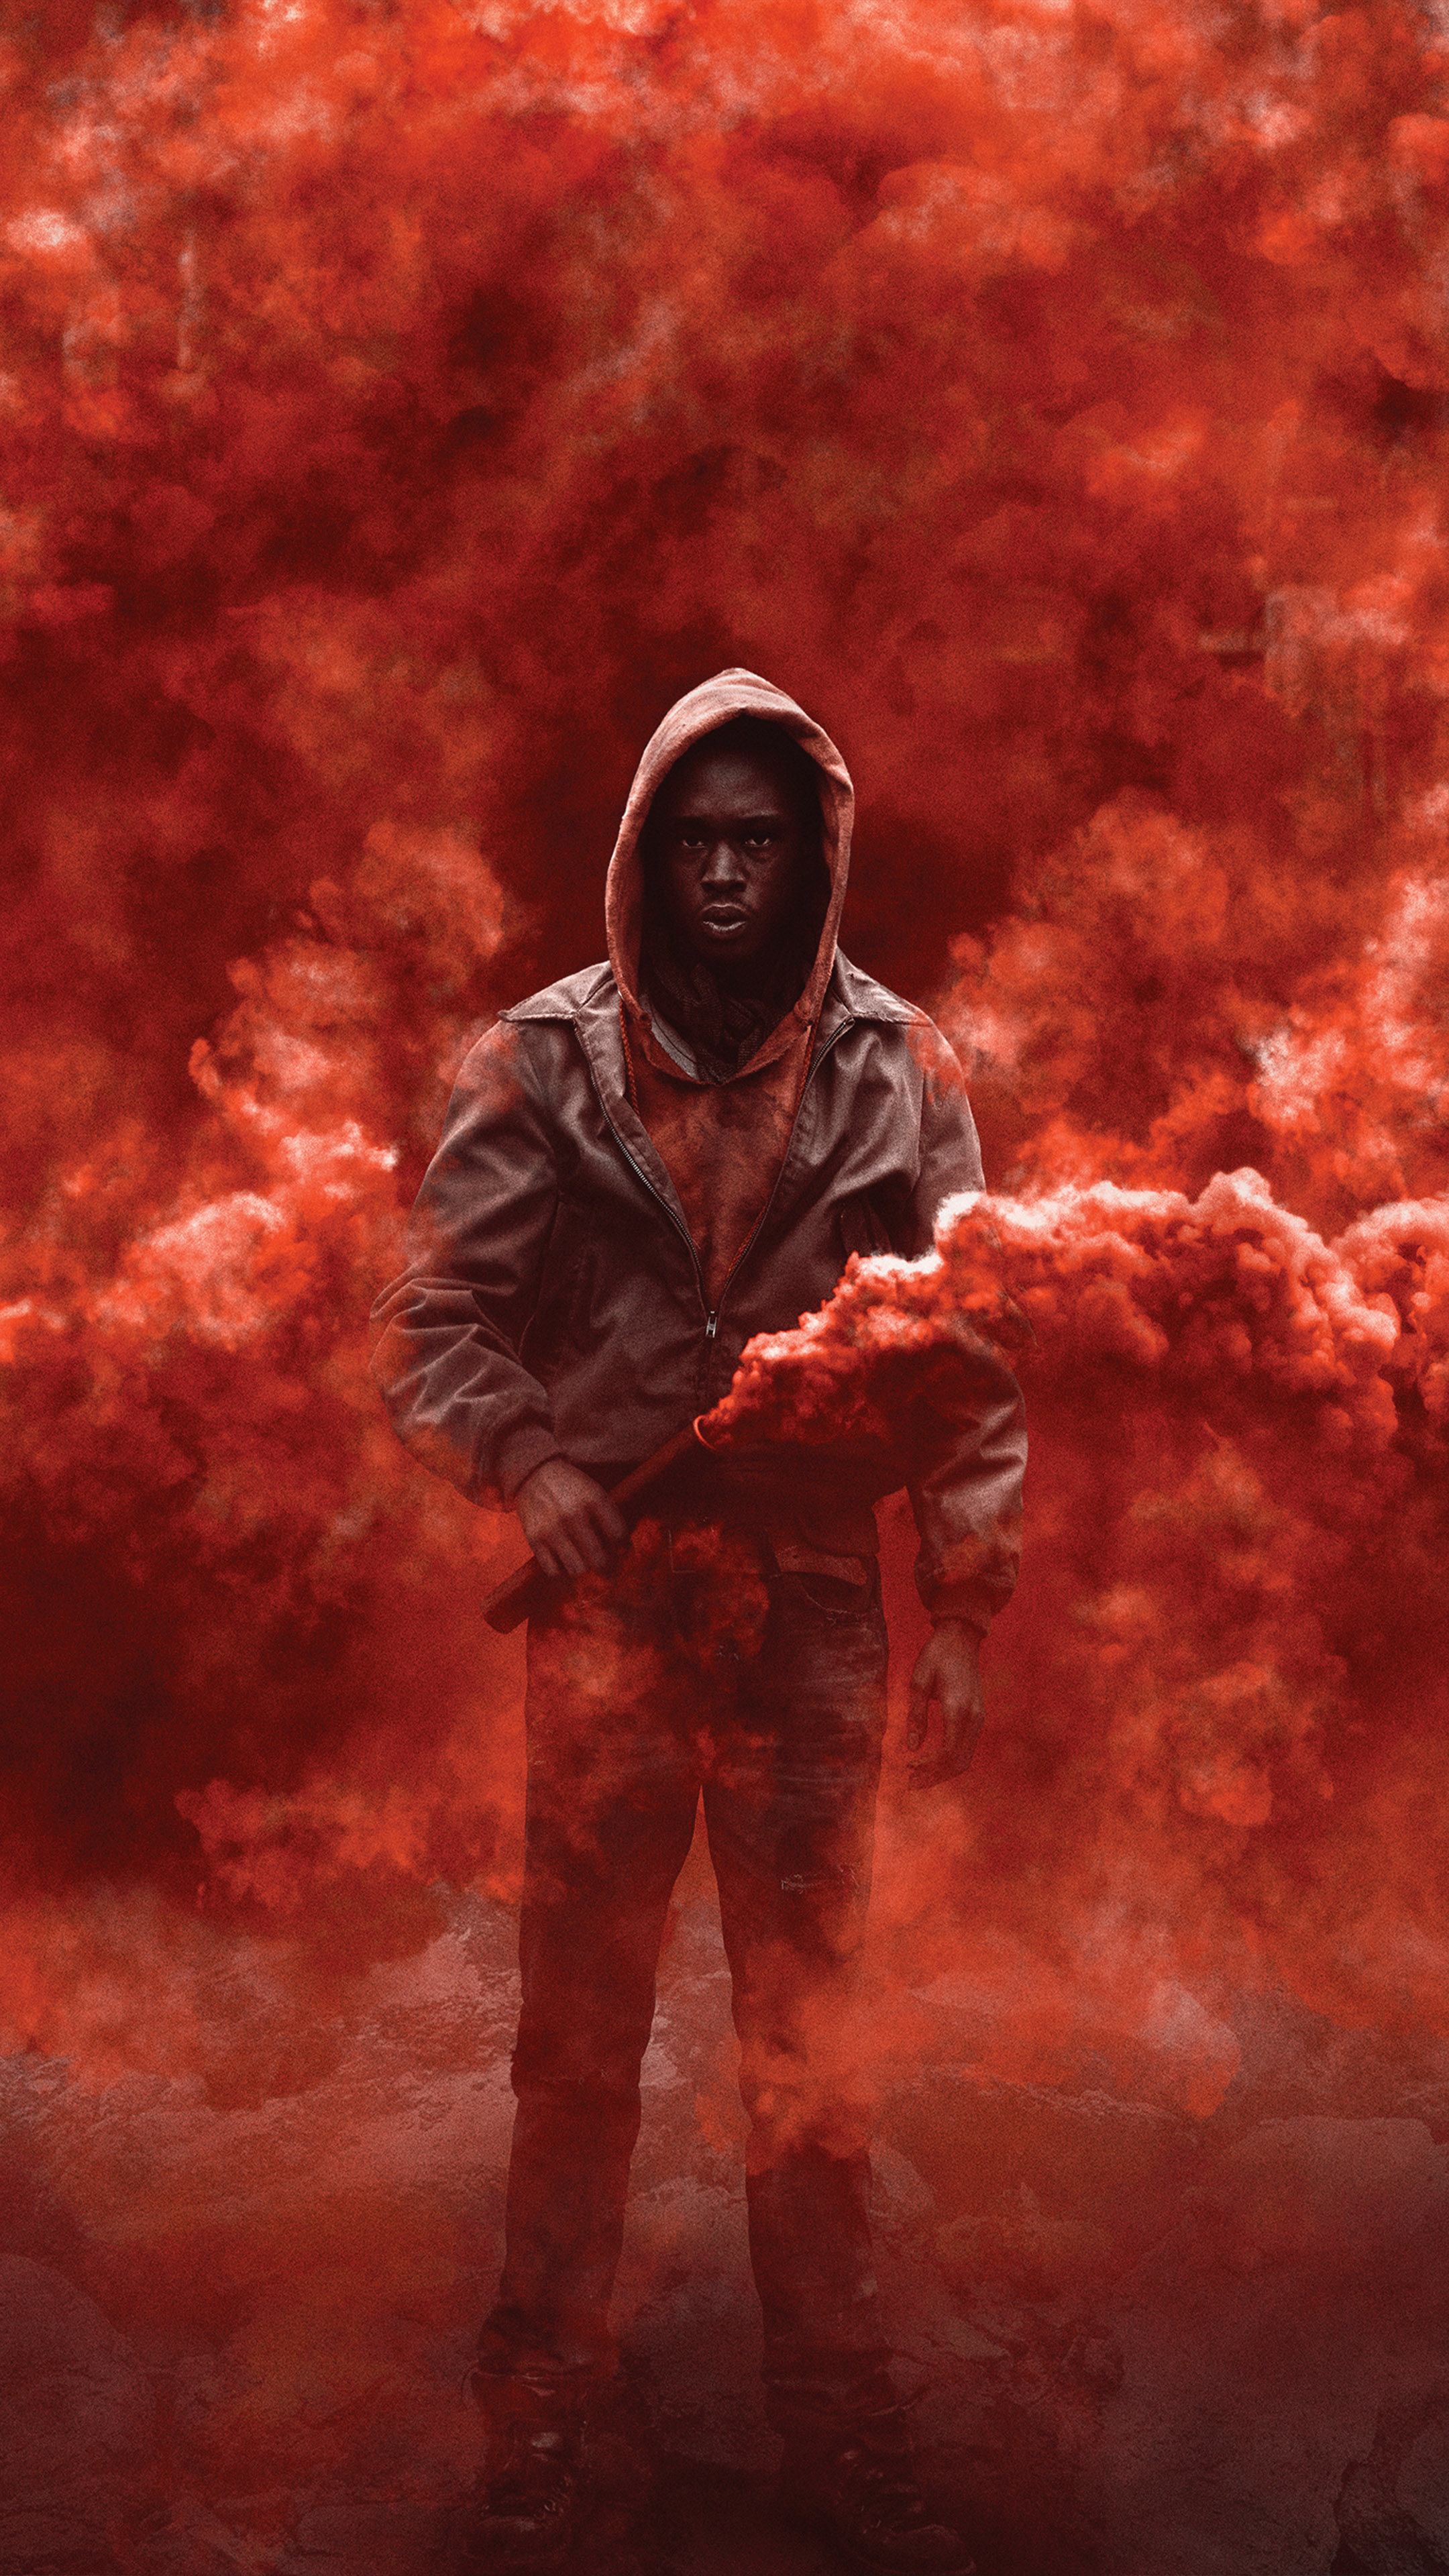 Download Captive State 2019 Full Hd Quality